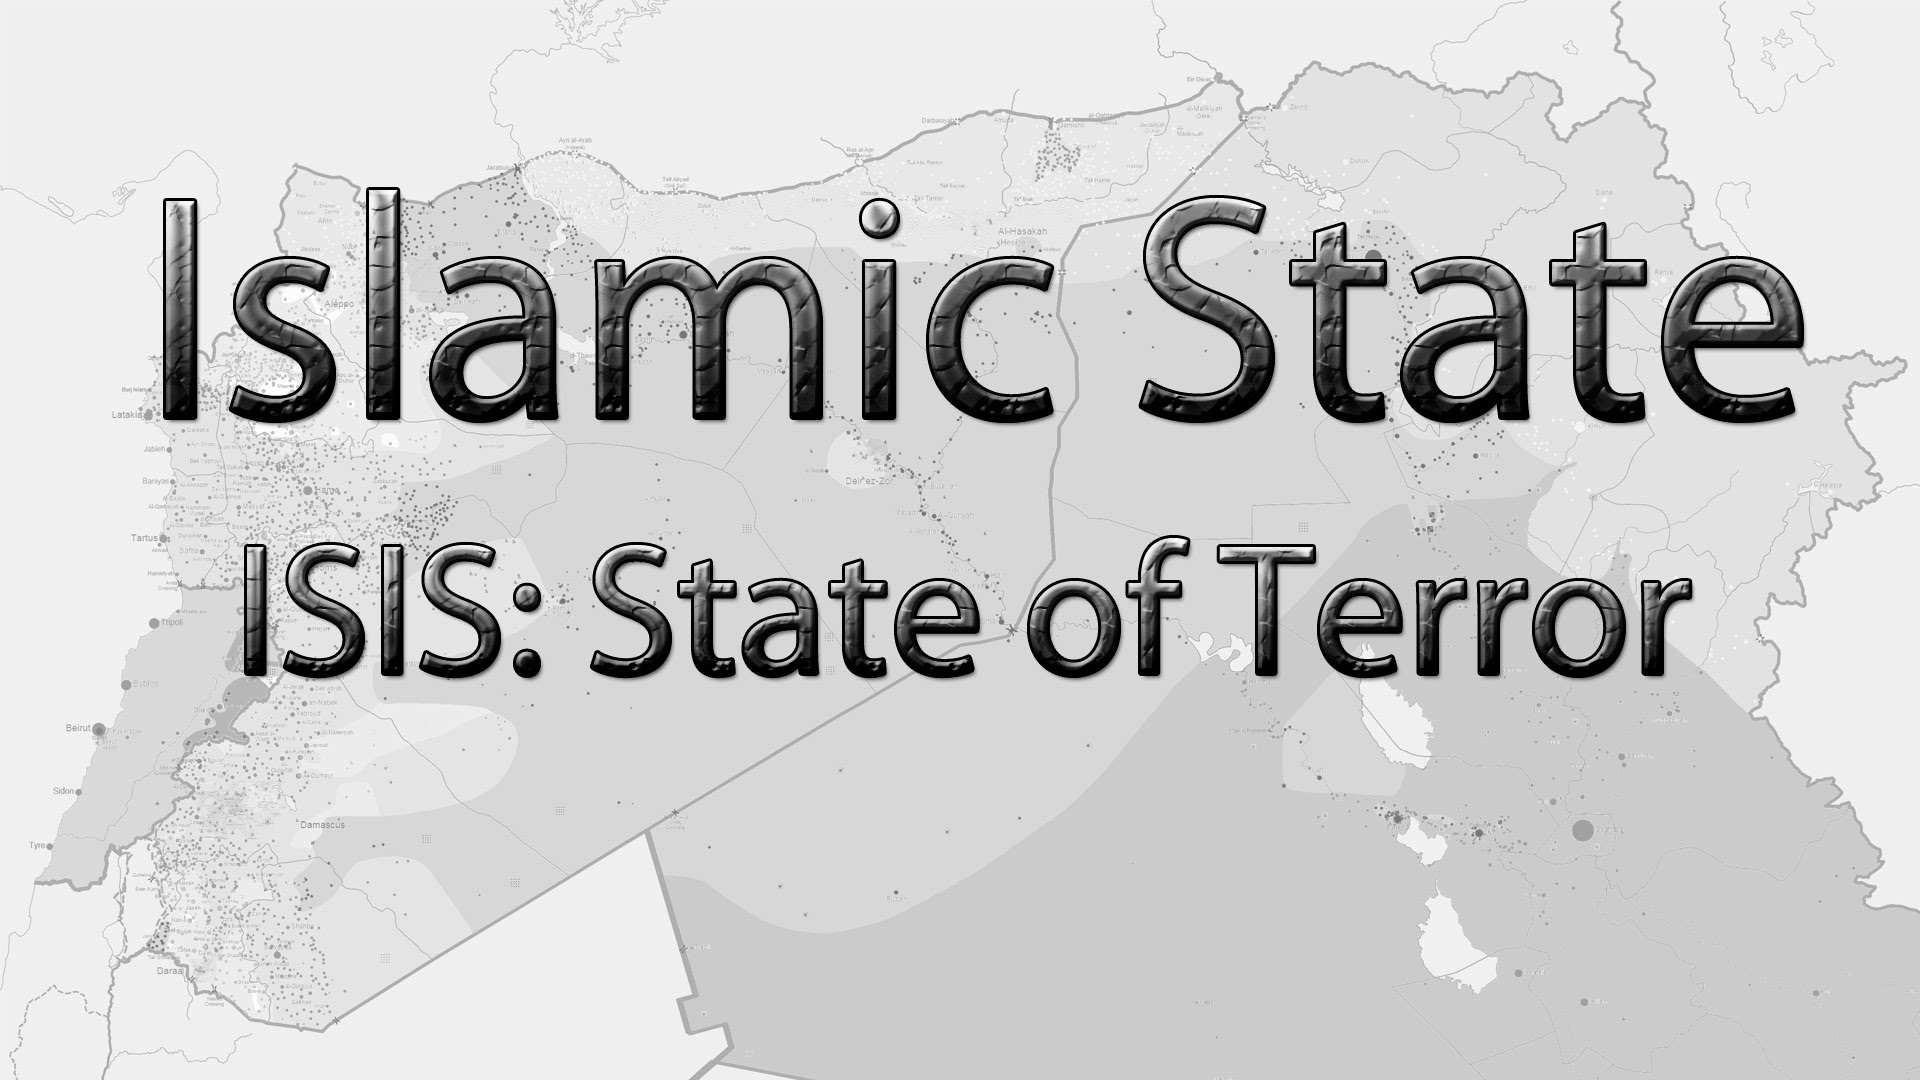 history channel documentary – ISIS: State of Terror – Islamic State